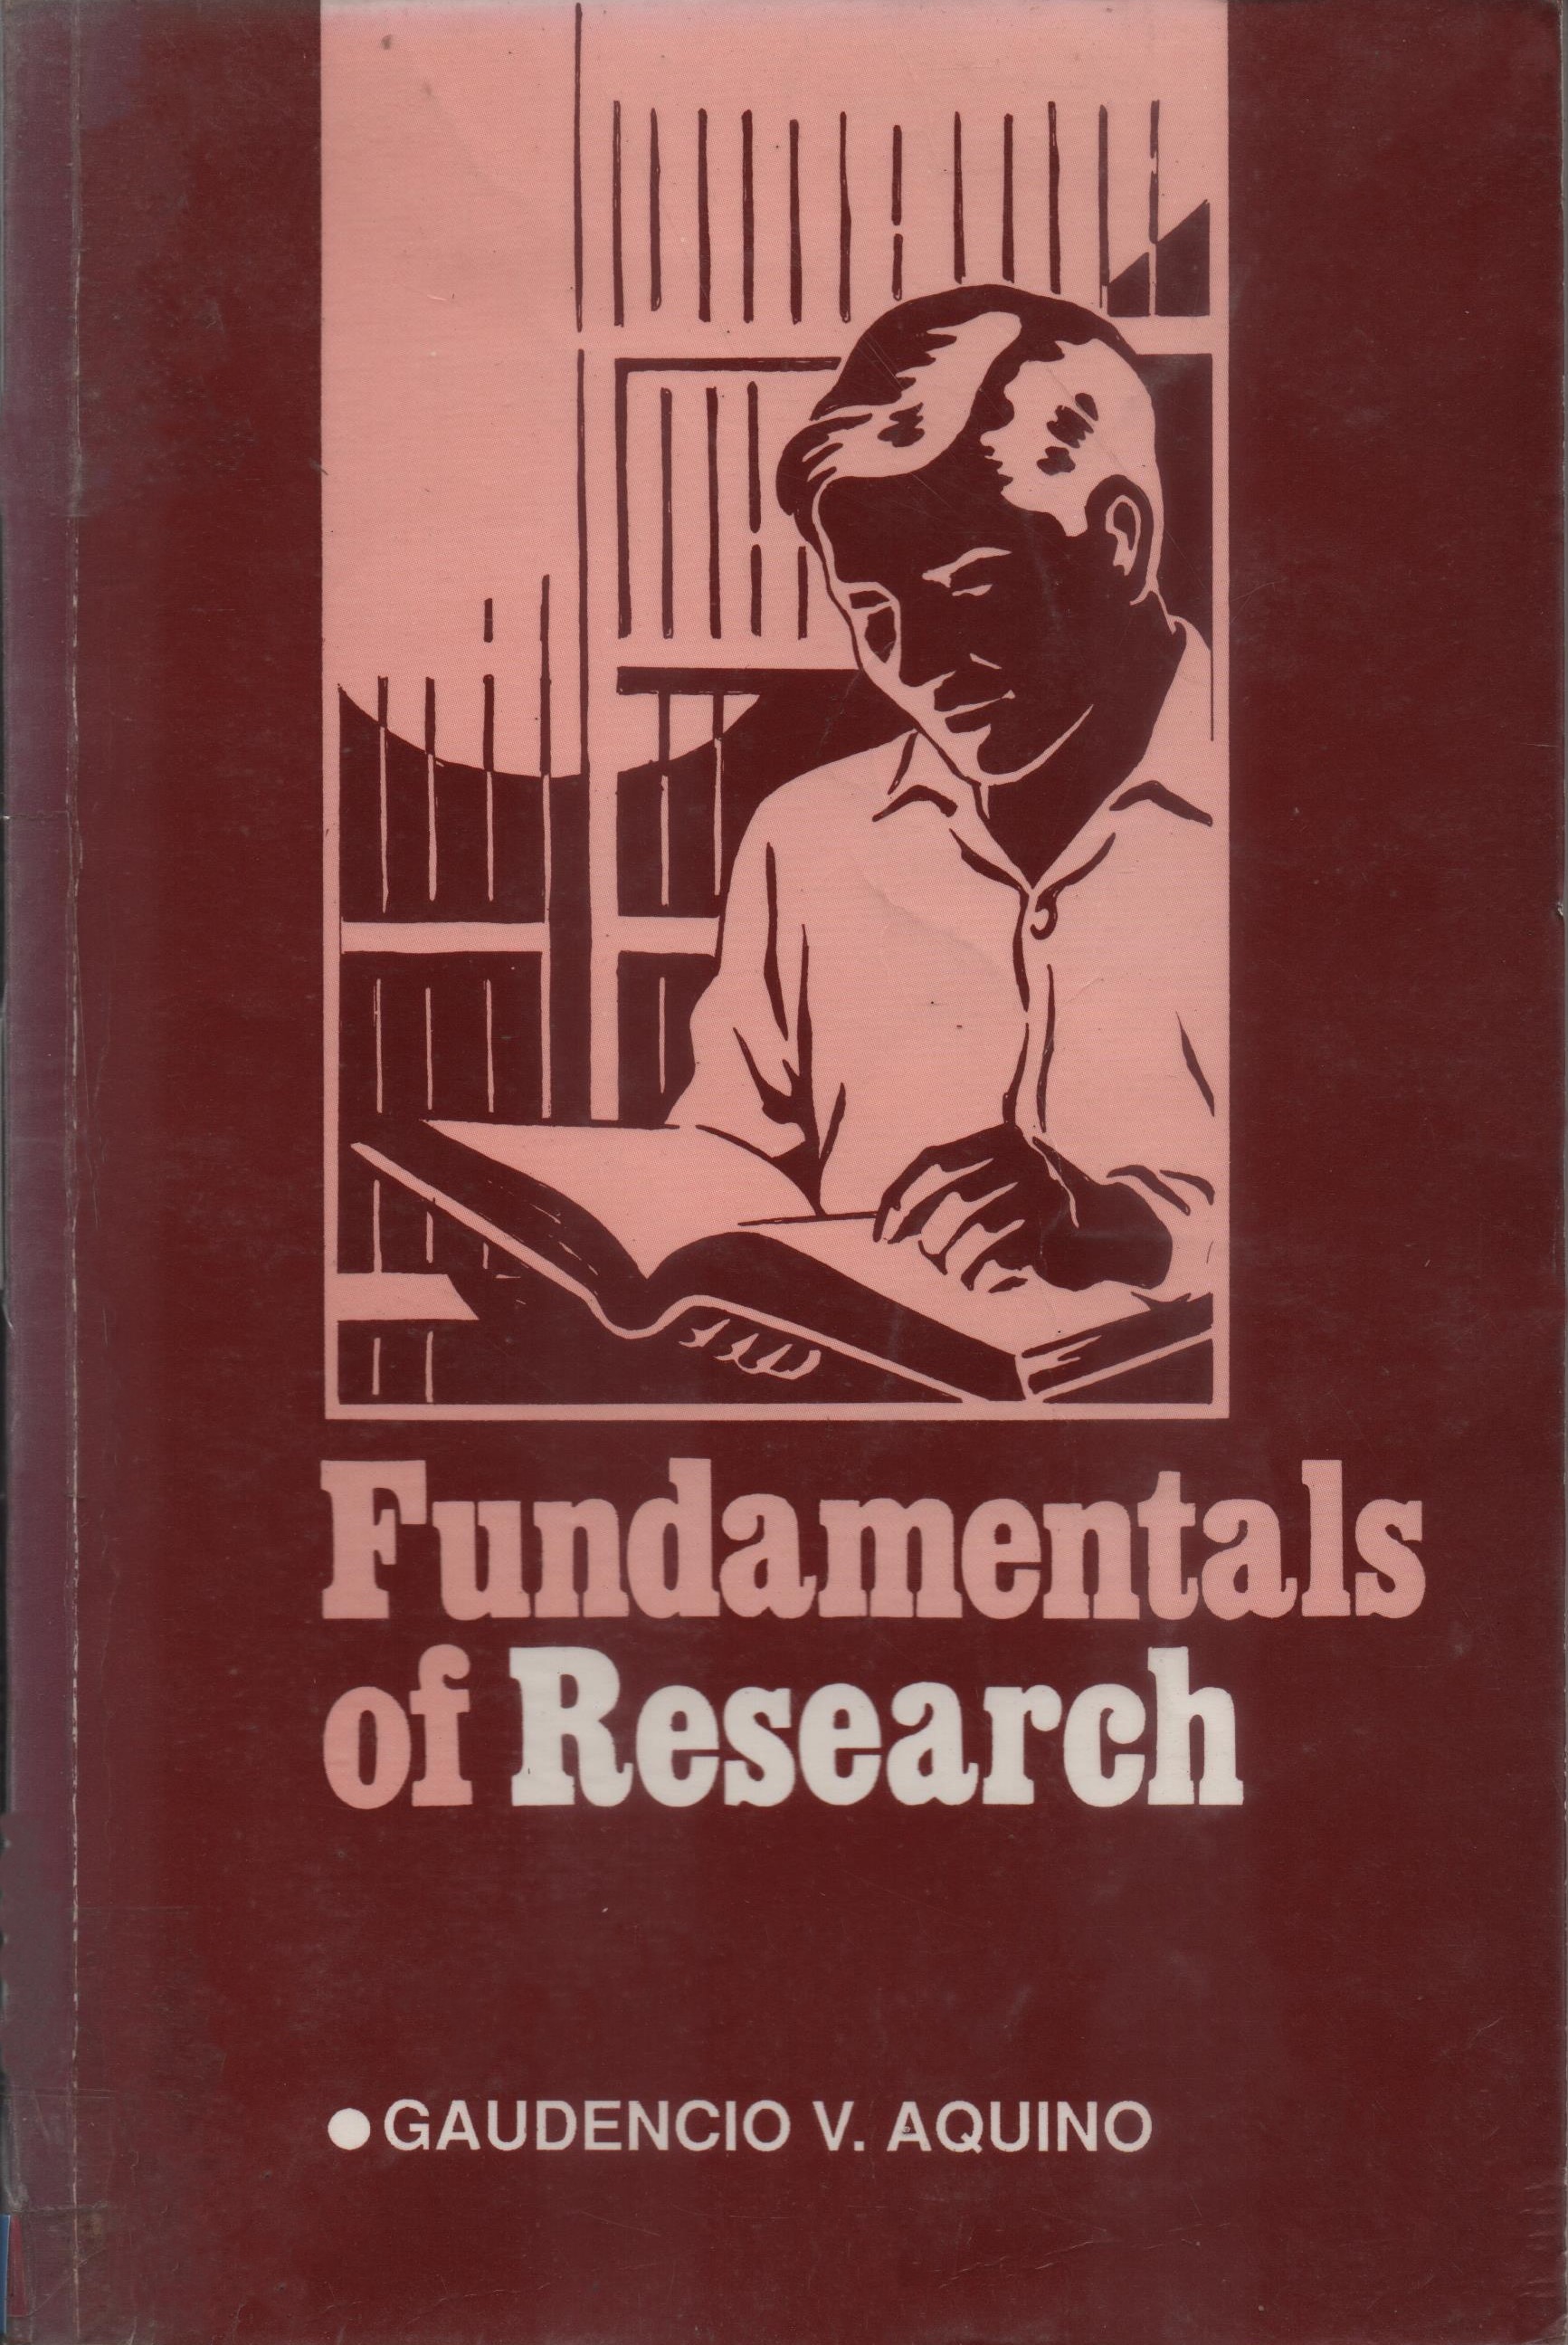 Fundamentals of research.